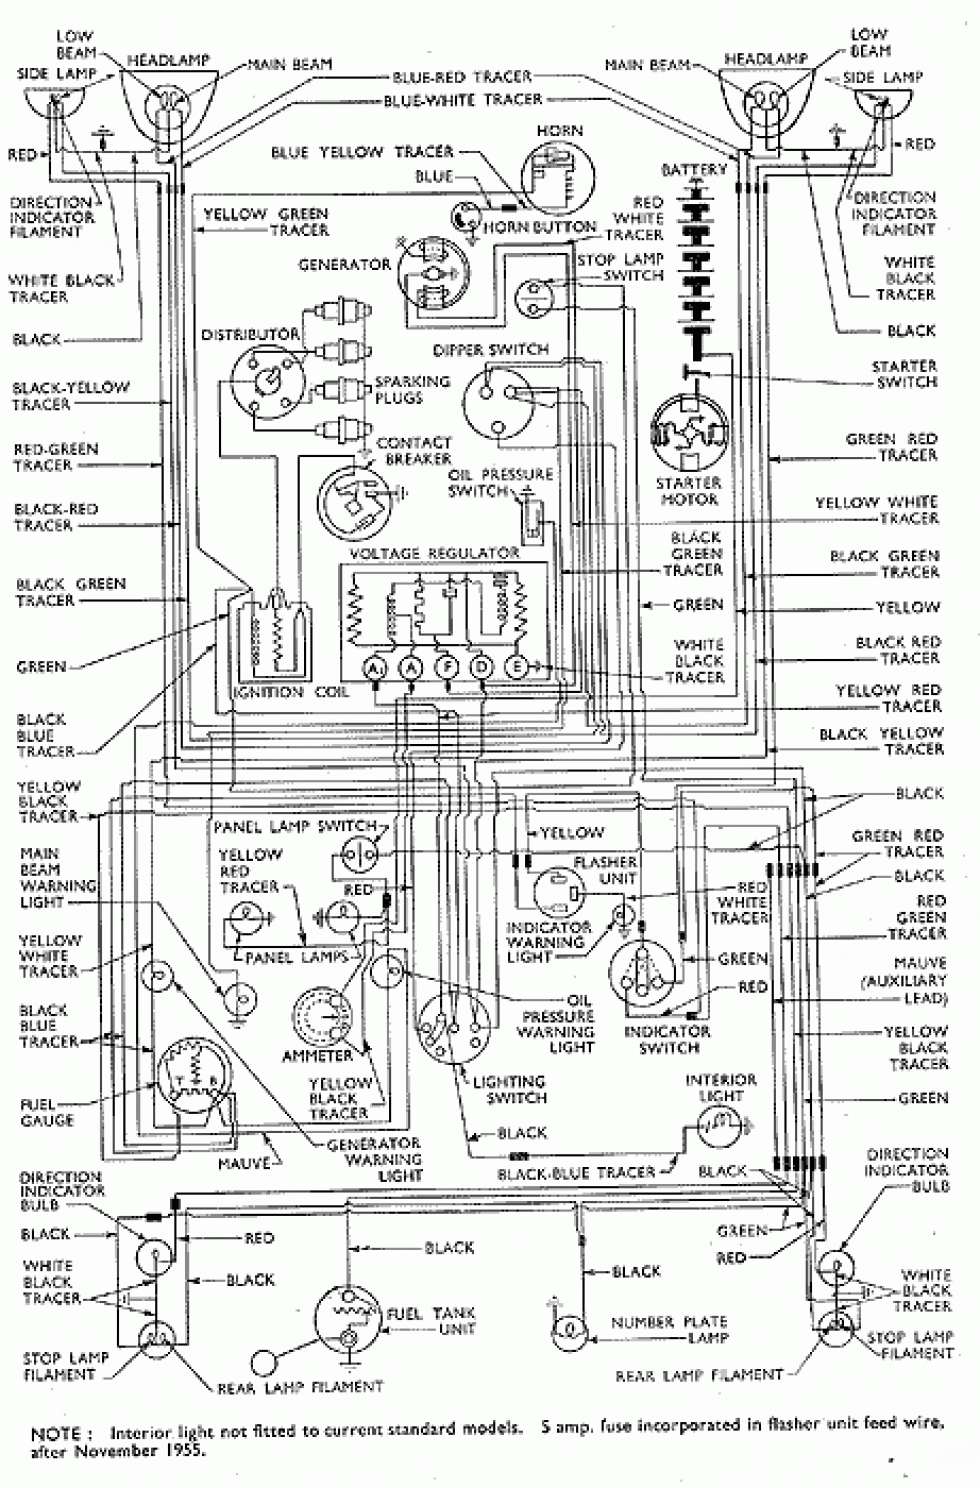 135: wiring diagram 100E Anglia after Febuary 1955 (exclude DeLuxe